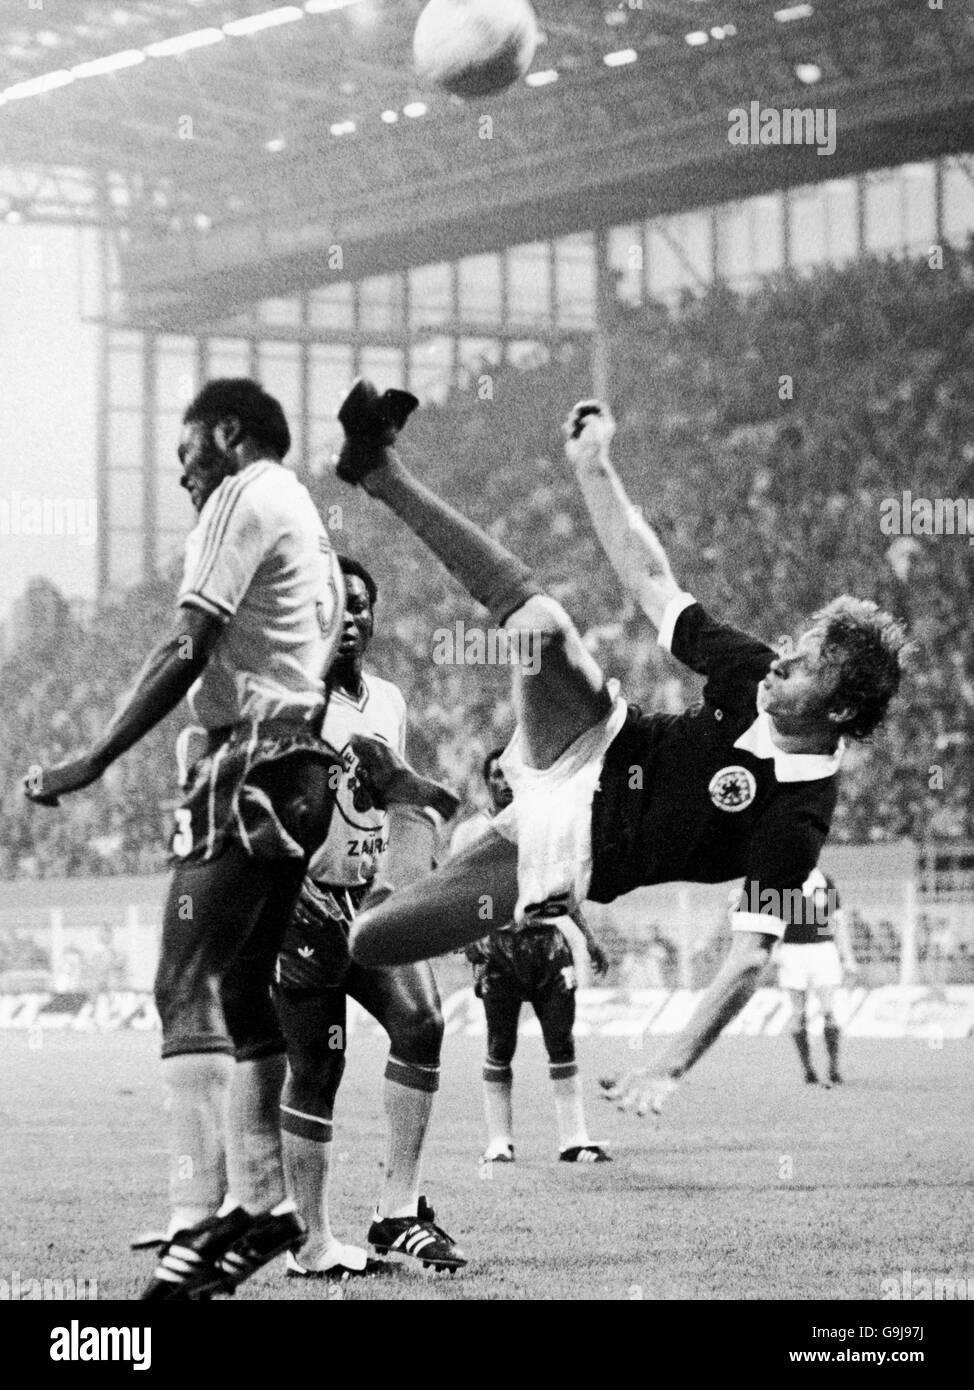 Soccer - FIFA World Cup West Germany 1974 - Group 2 - Zaire v Scotland - Westfalenstadion, Dortmund. Zaire's Mwanza Mukombo (l) gets in the way as Scotland's Denis Law (c) tries an overhead kick Stock Photo